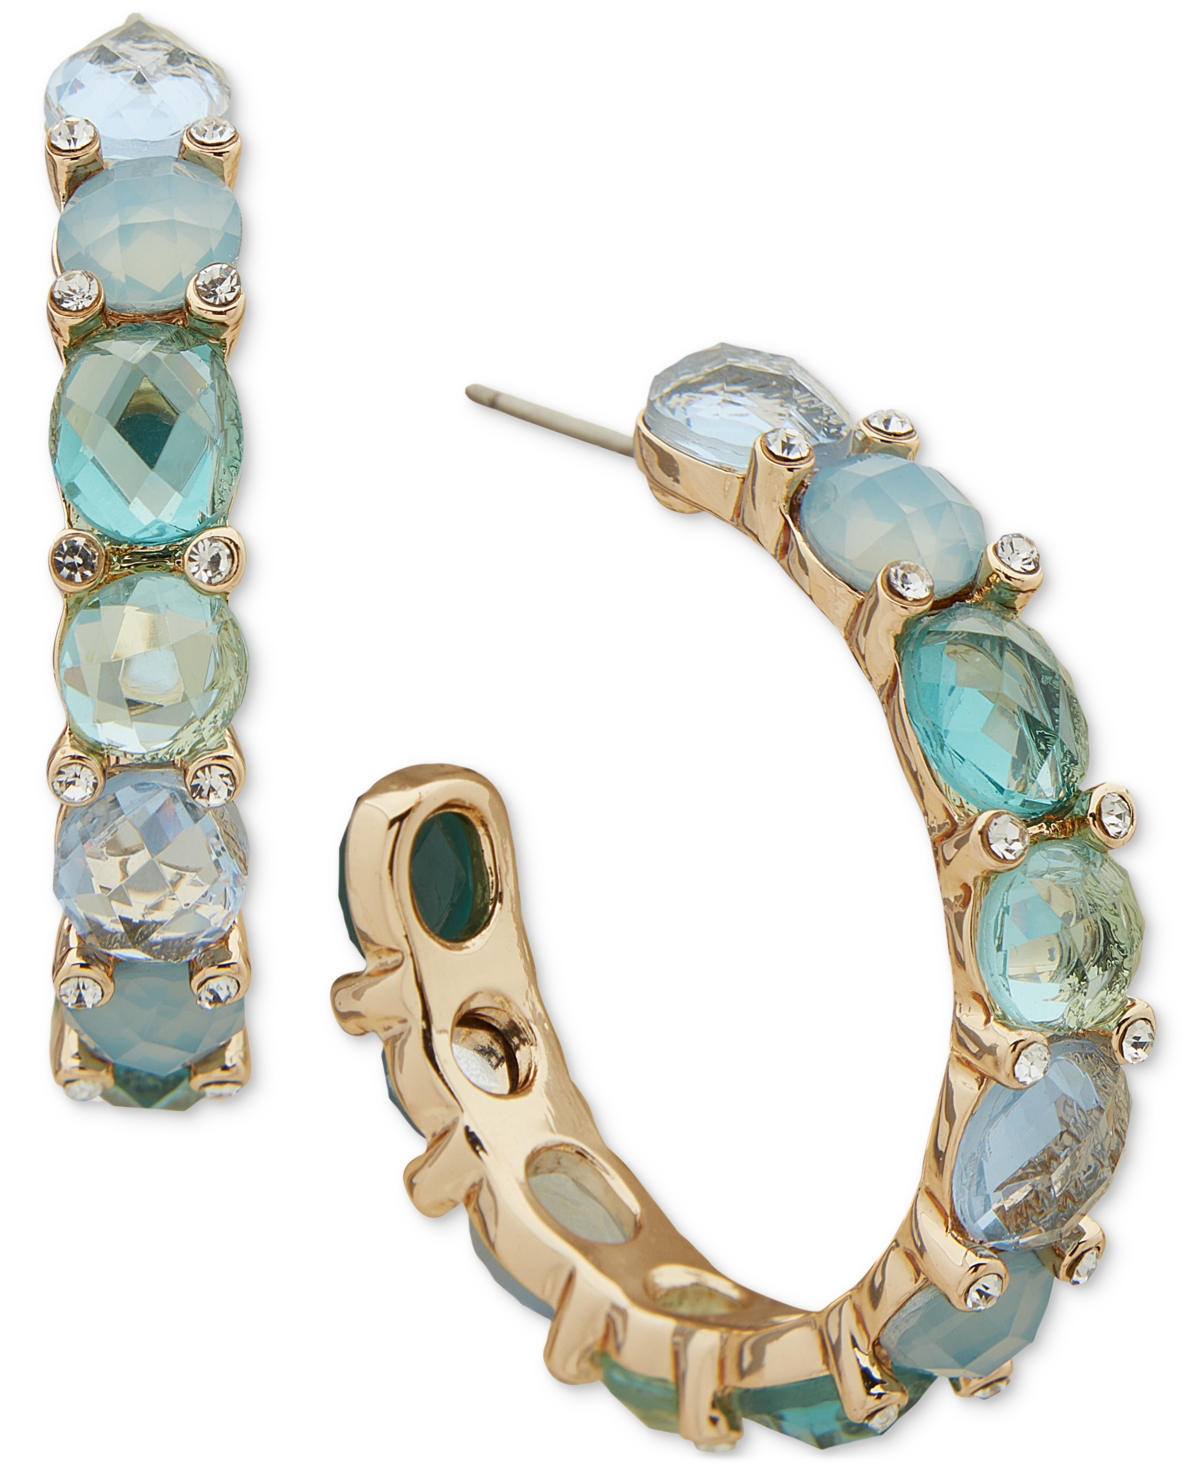 Gold-Tone Small Mixed Stone C-Hoop Earrings, 1" - Blue